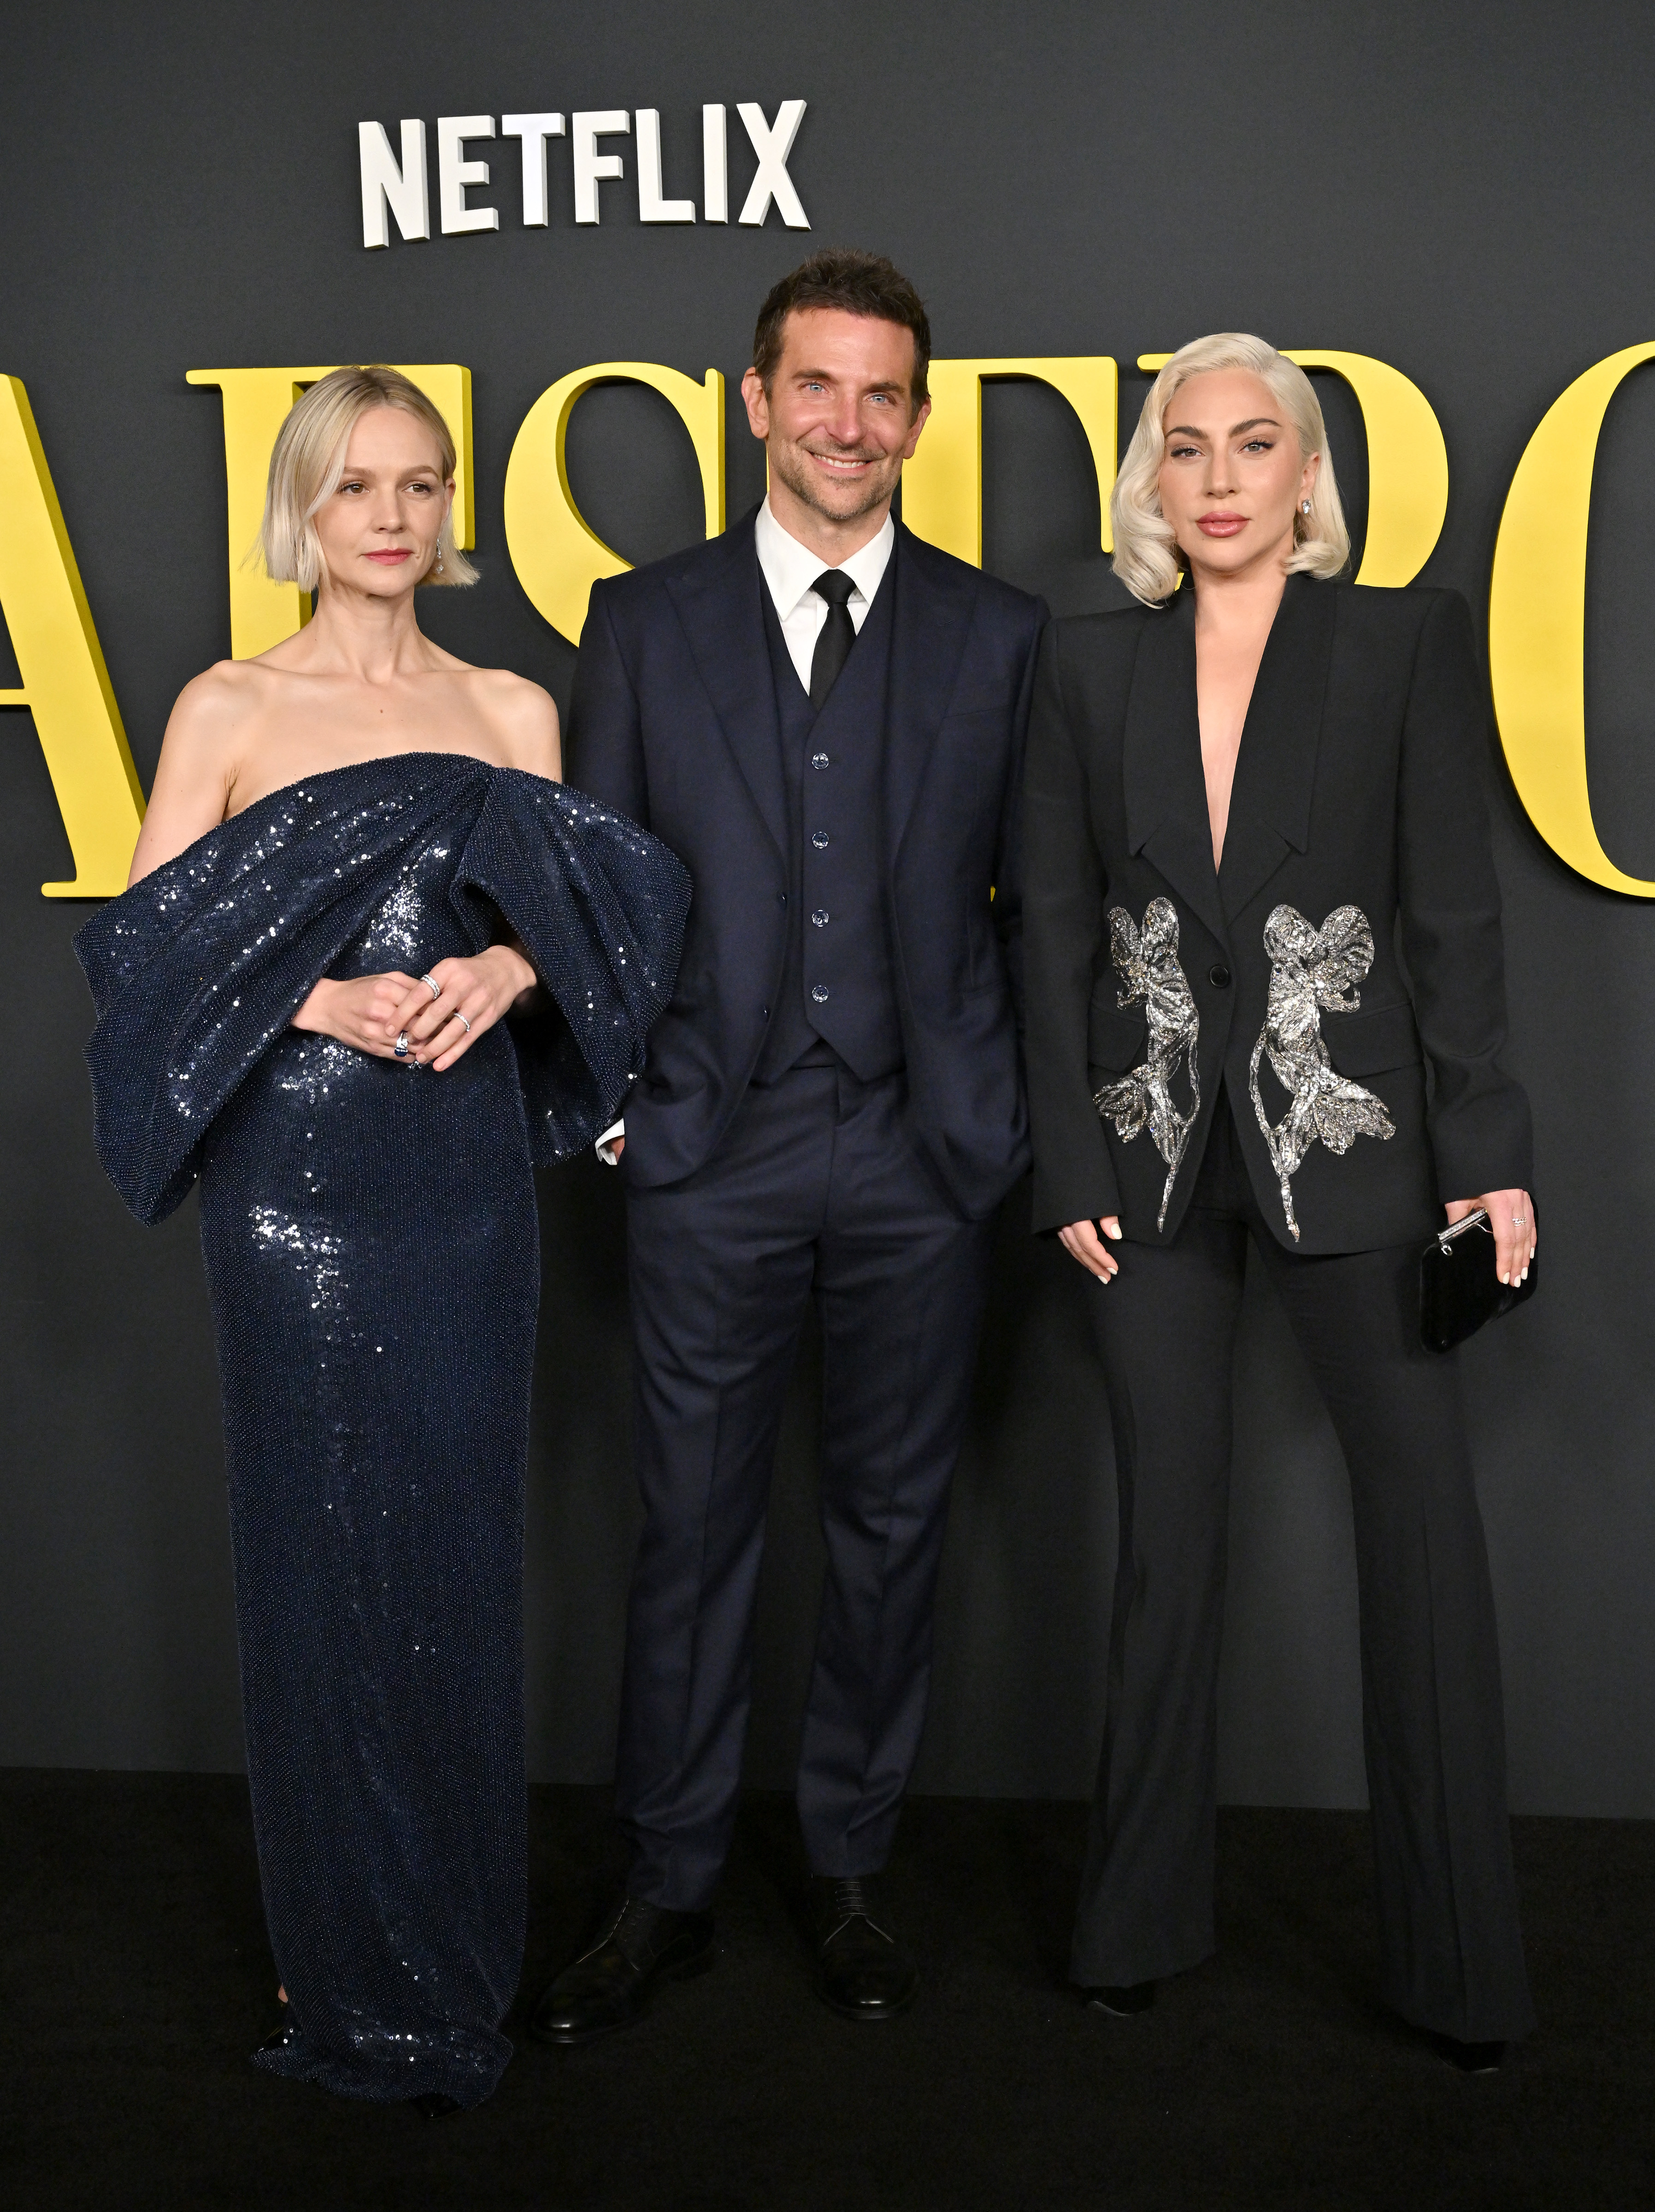 bradley standing in the middle of carey and lady gaga